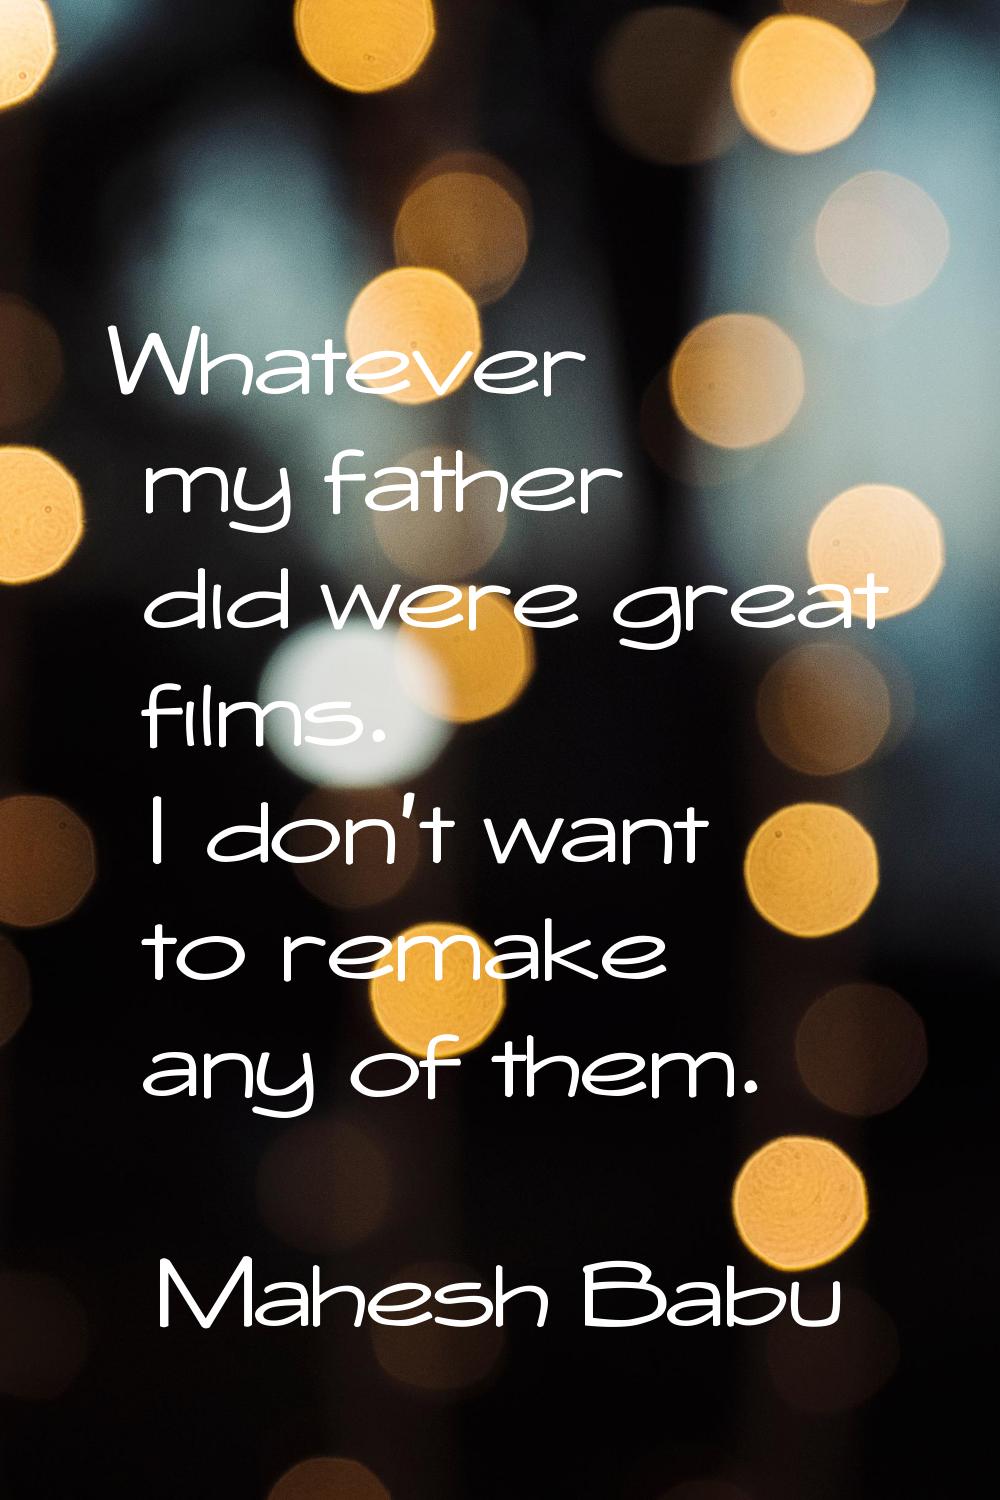 Whatever my father did were great films. I don't want to remake any of them.